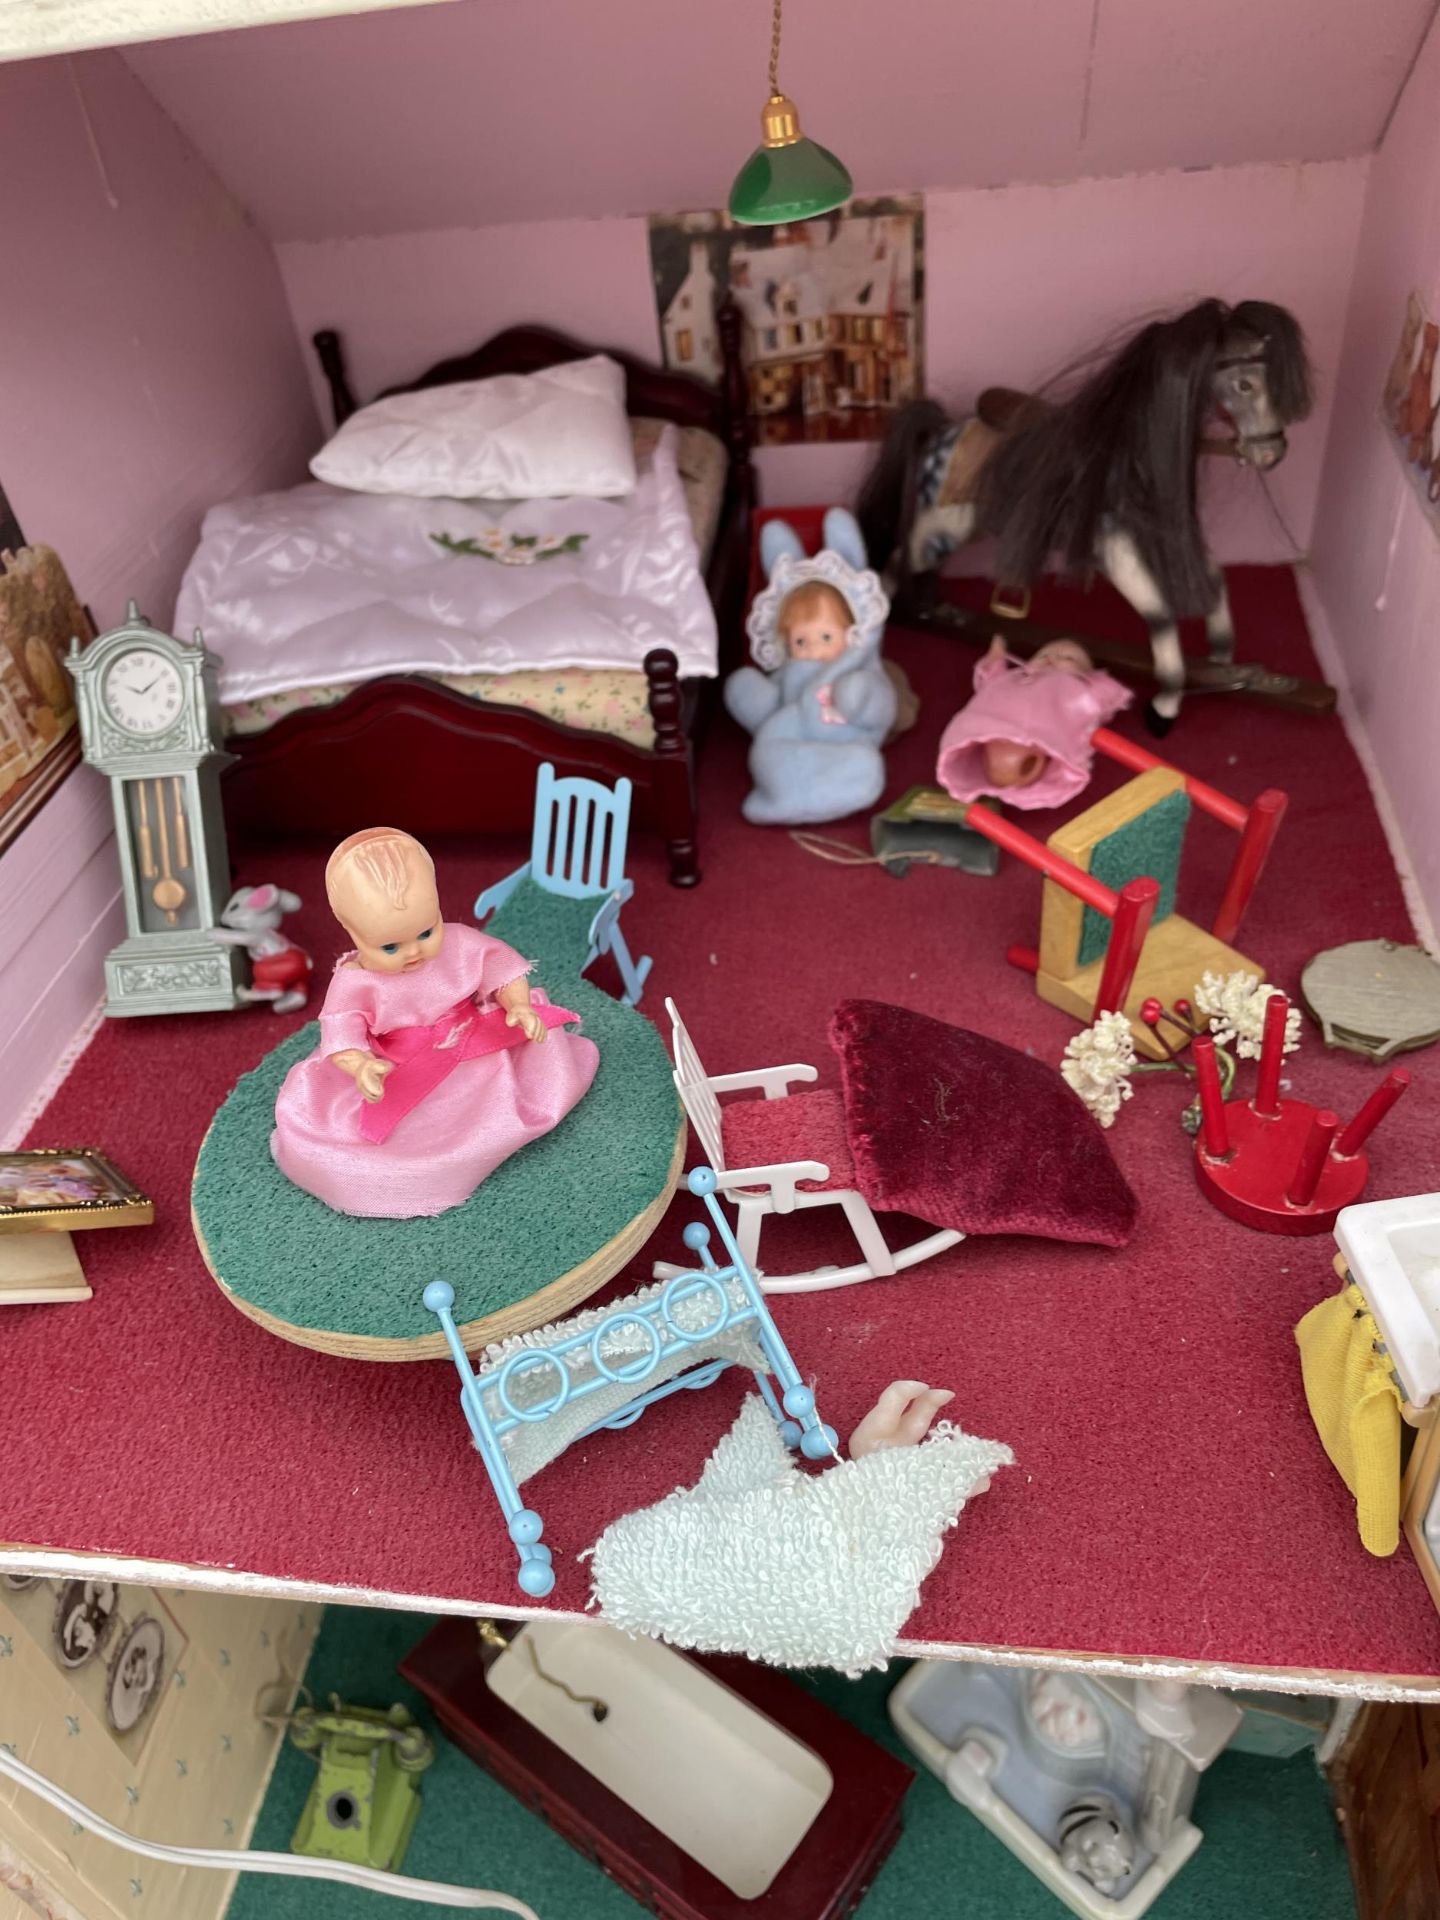 A LARGE WOODEN DOLLS HOUSE WITH A LARGE QUANTITY OF DOLLS HOUSE FURNITURE - Image 9 of 9